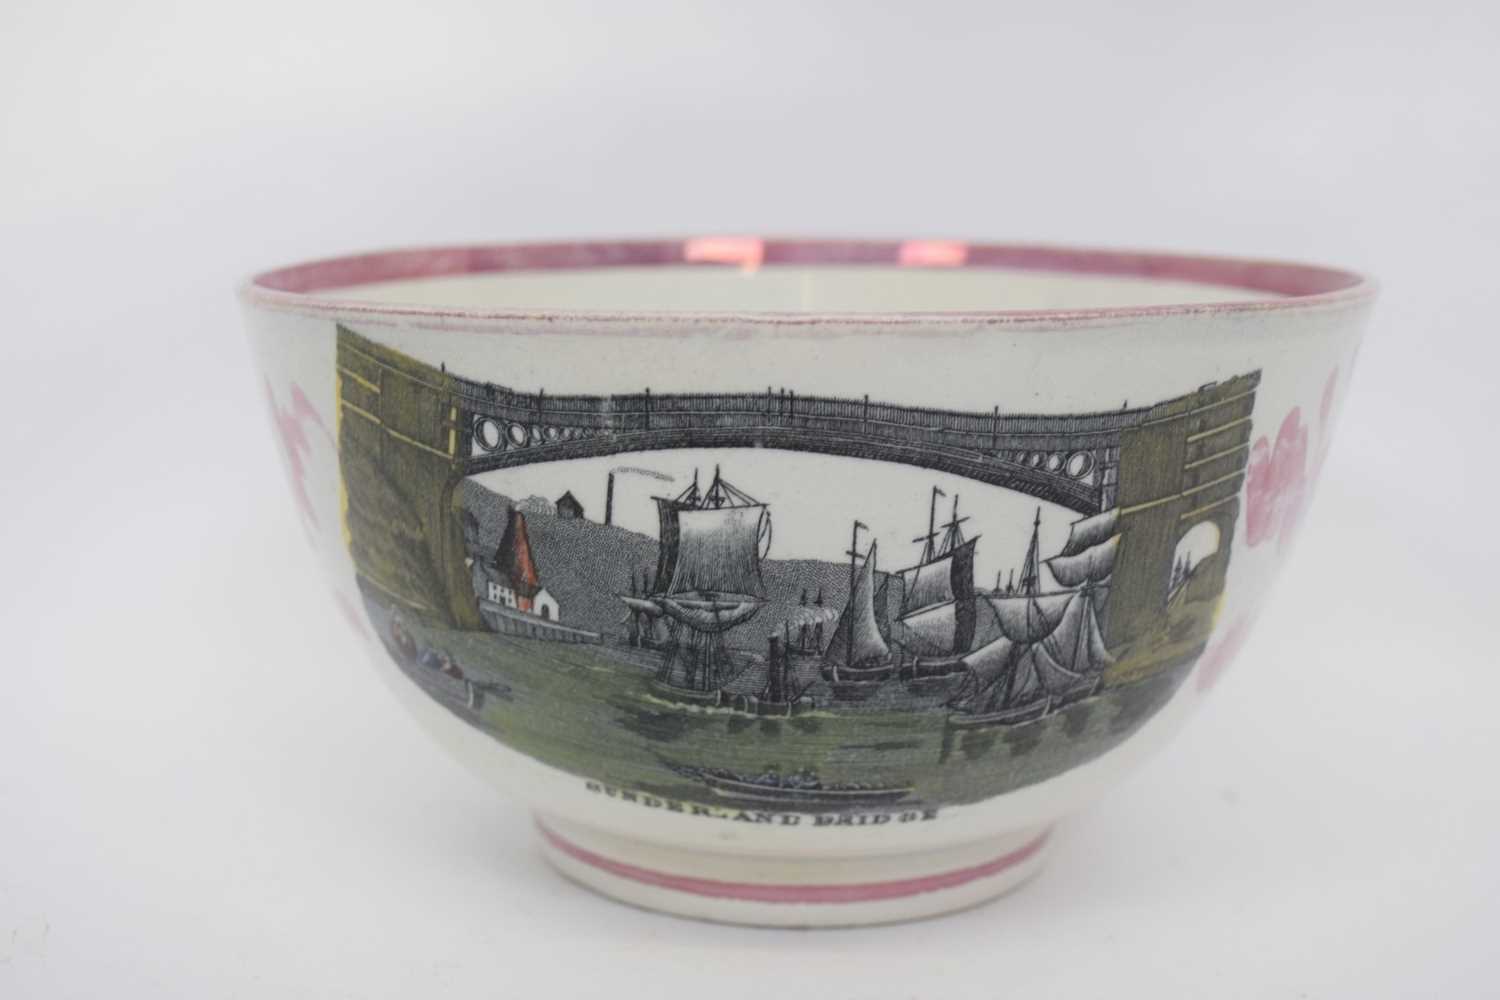 Sunderland lustre bowl with a view of Sunderland Bridge and the Agamemnon in a storm verso, 19cm - Image 4 of 5